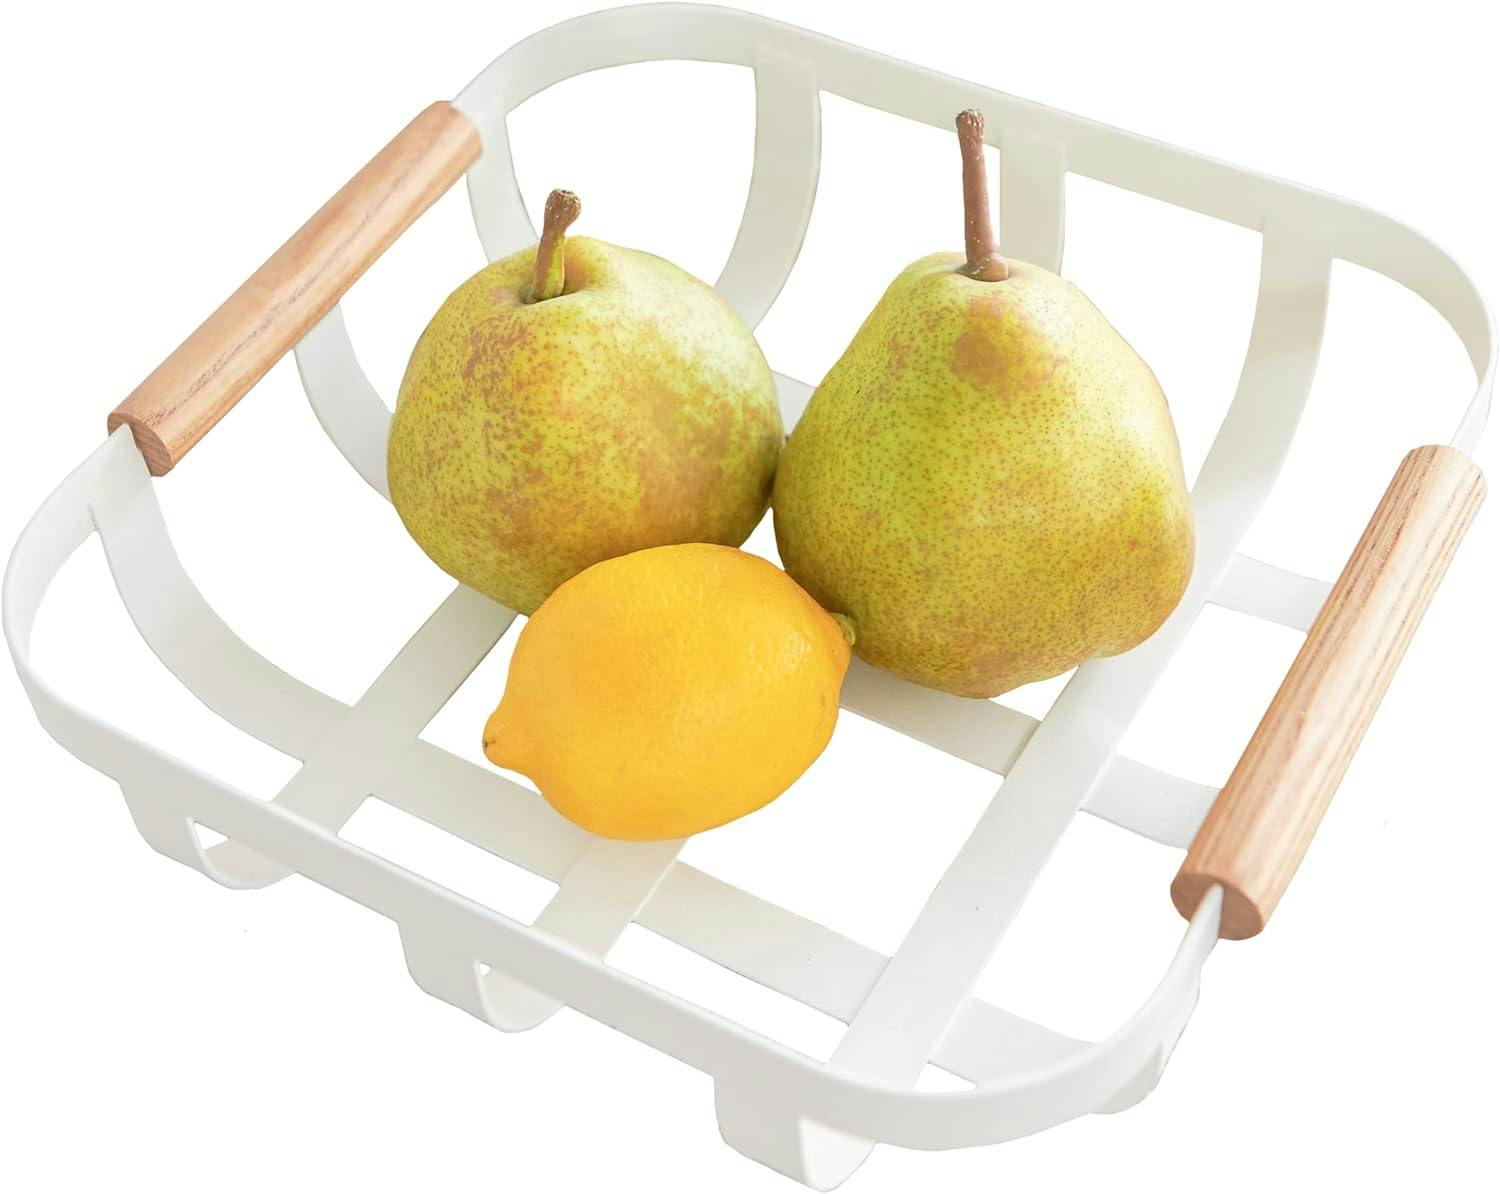 Tosca White Steel and Wood Square Fruit Display Bowl